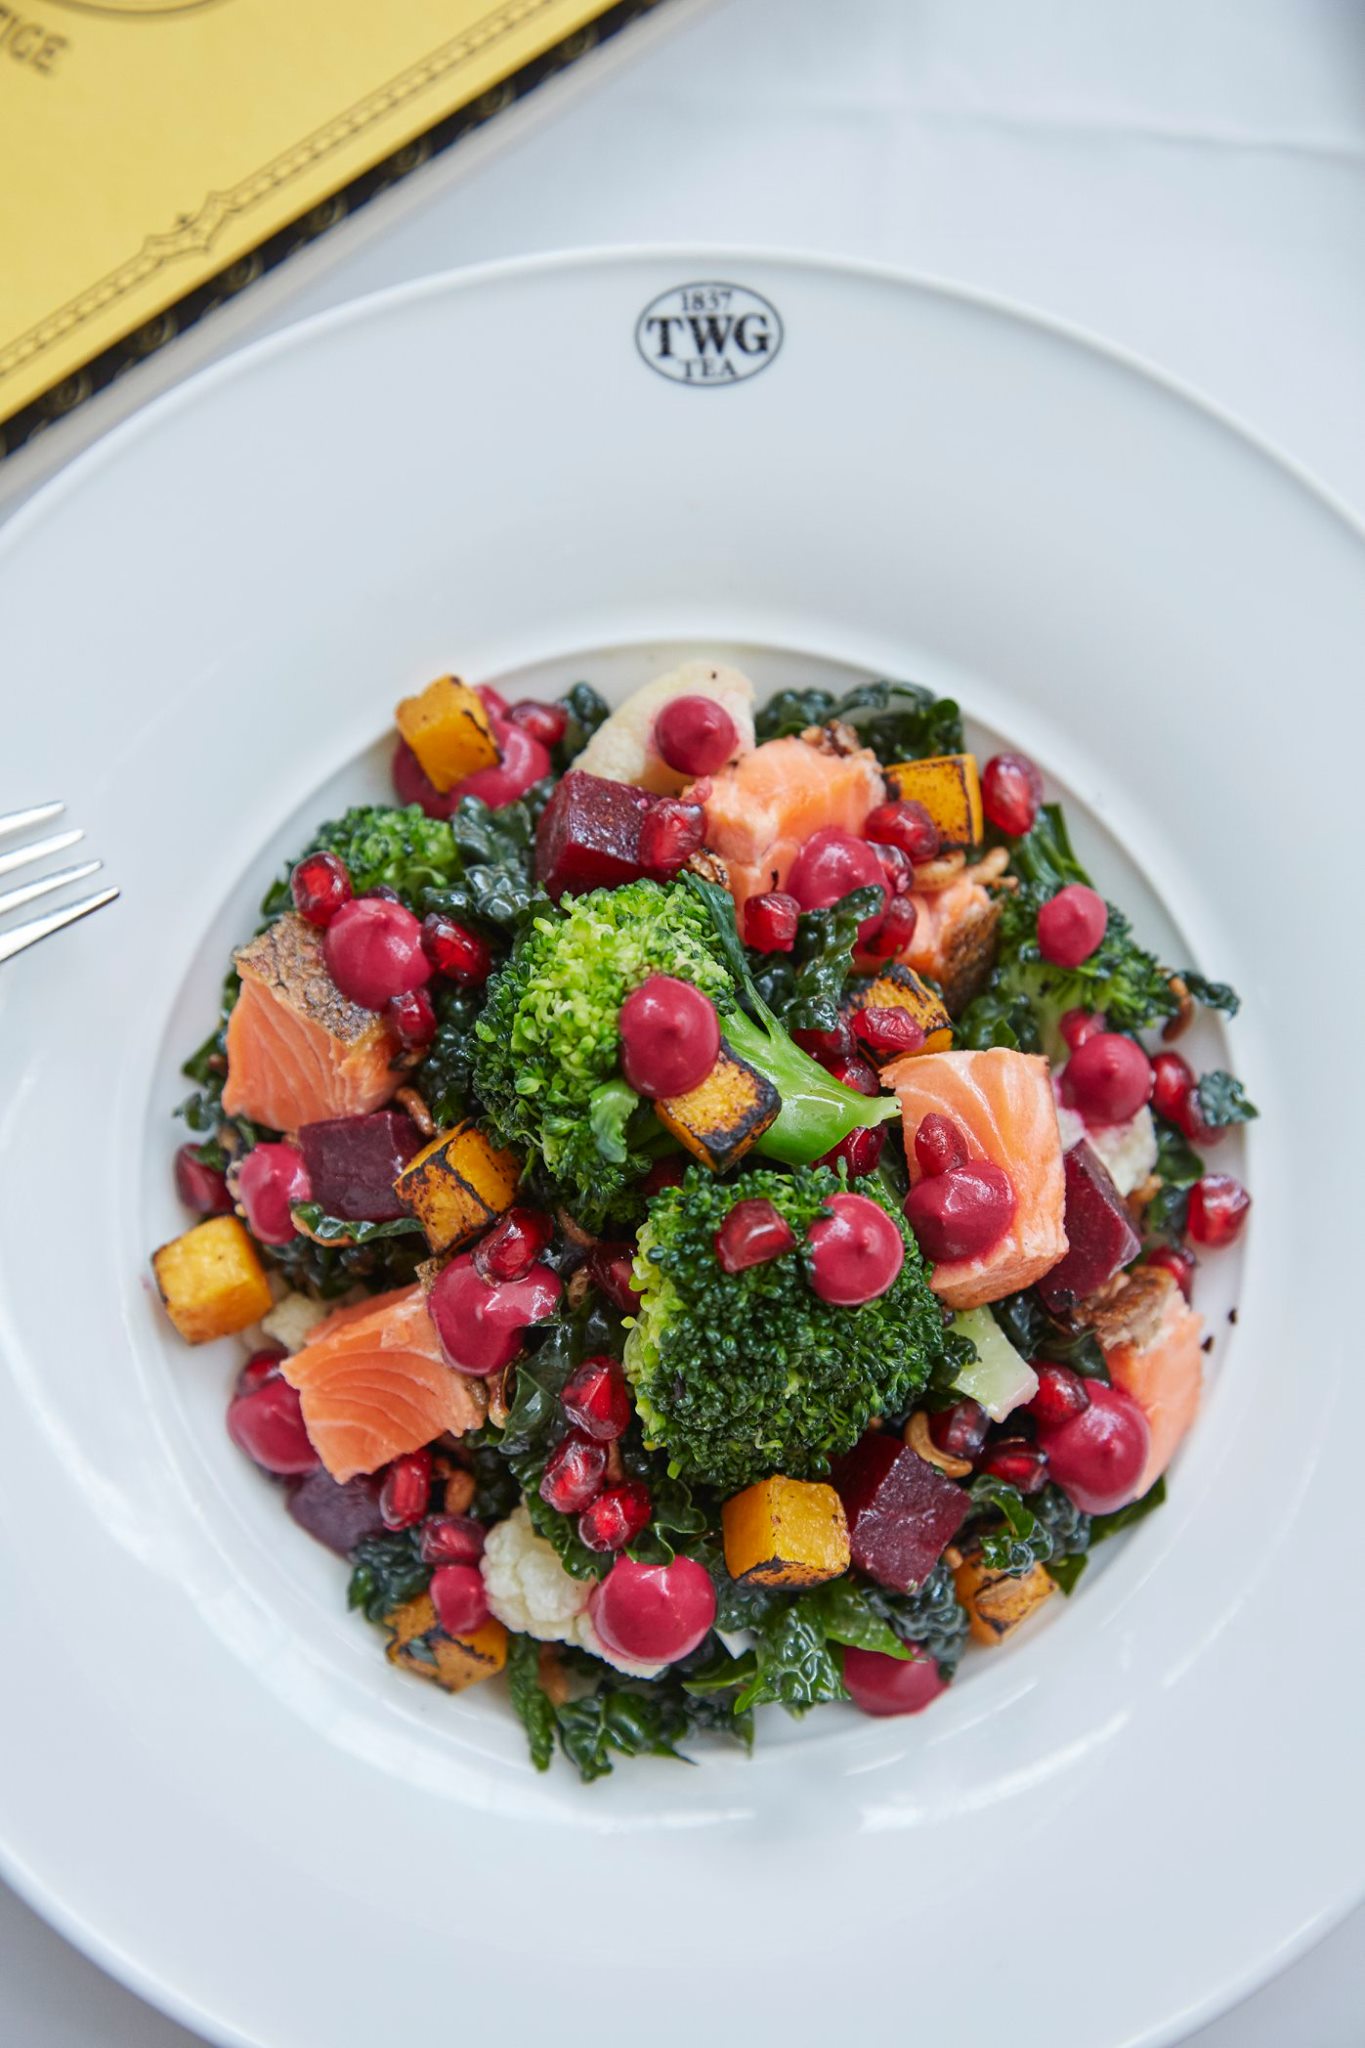 Here's to a colorful day ahead, TWG Tea seared Tasmanian ocean trout on a bed of Tuscan kale salad with roasted pumpkins, puffed wild rice, broccoli and cauliflower seasoned with a calamansi dressing, served with fresh pomegranate and an Indian Night Tea infused beetroot relish on this week's set menu. Available at all TWG Tea Salons in Singapore.